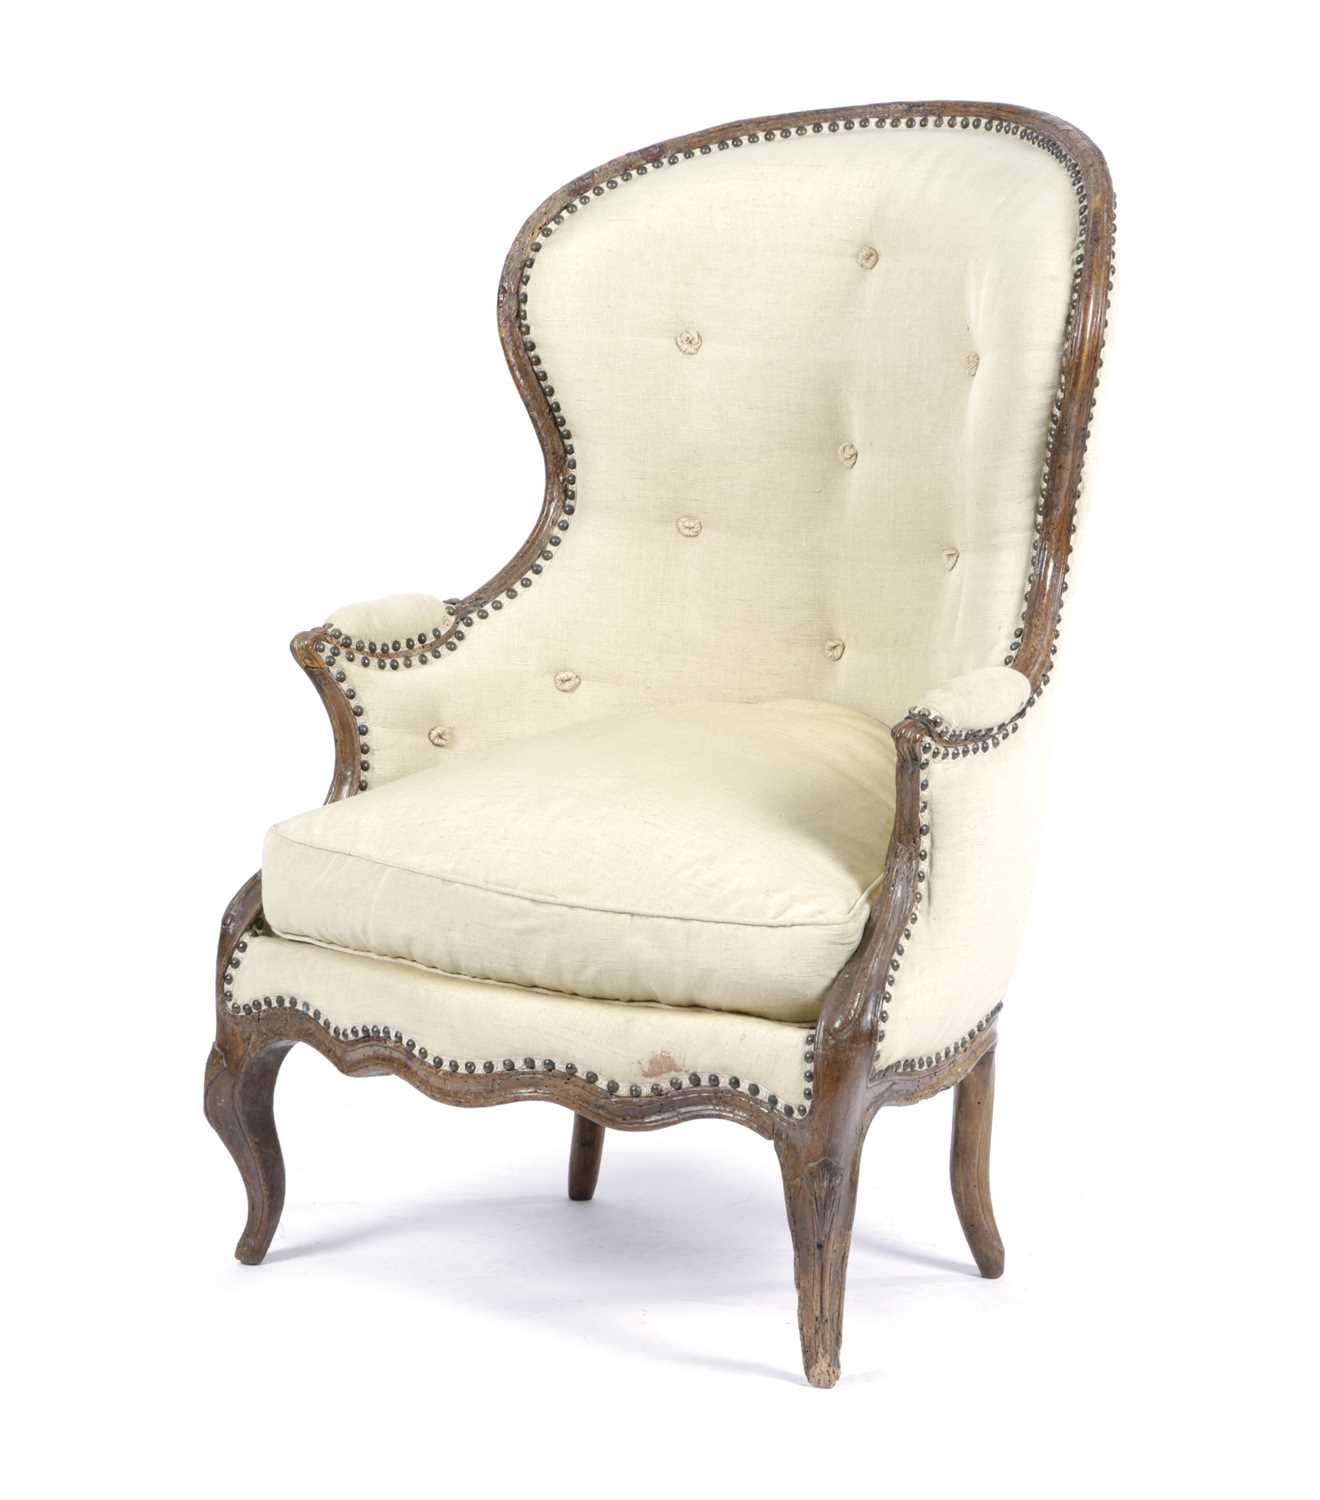 AN ITALIAN WALNUT BERGÈRE 18TH CENTURY with later brass studded upholstery, the moulded frame on